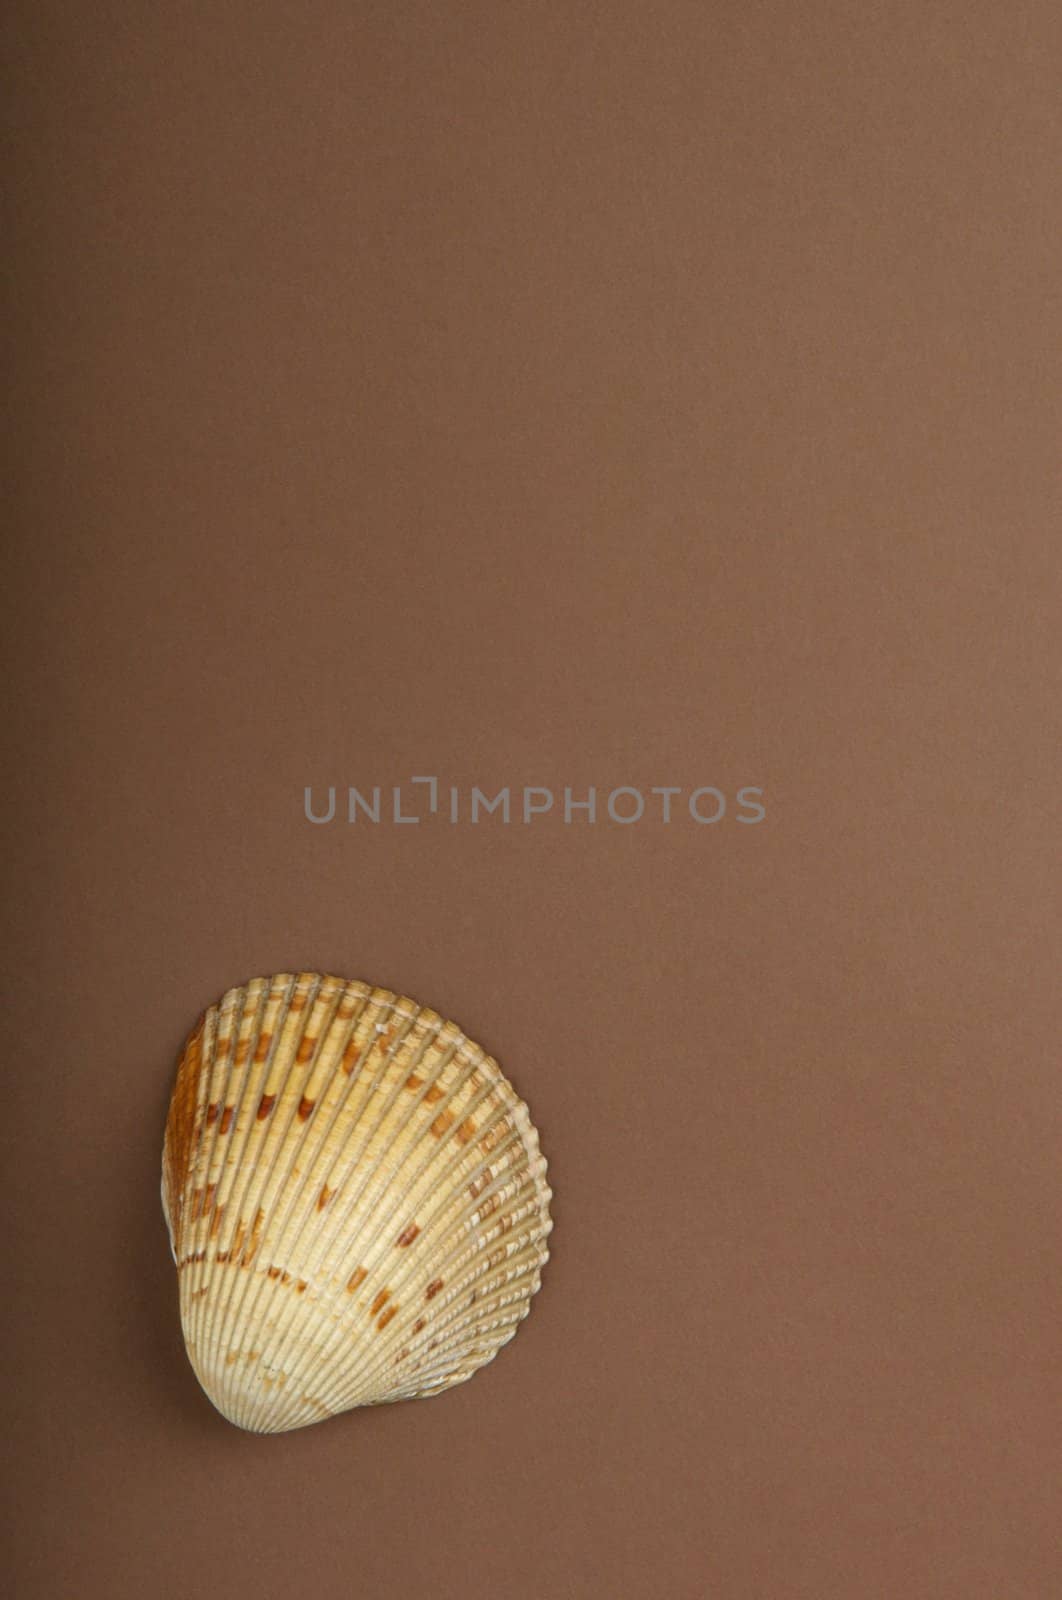 An image of a sea shell with a brown background by Deimages